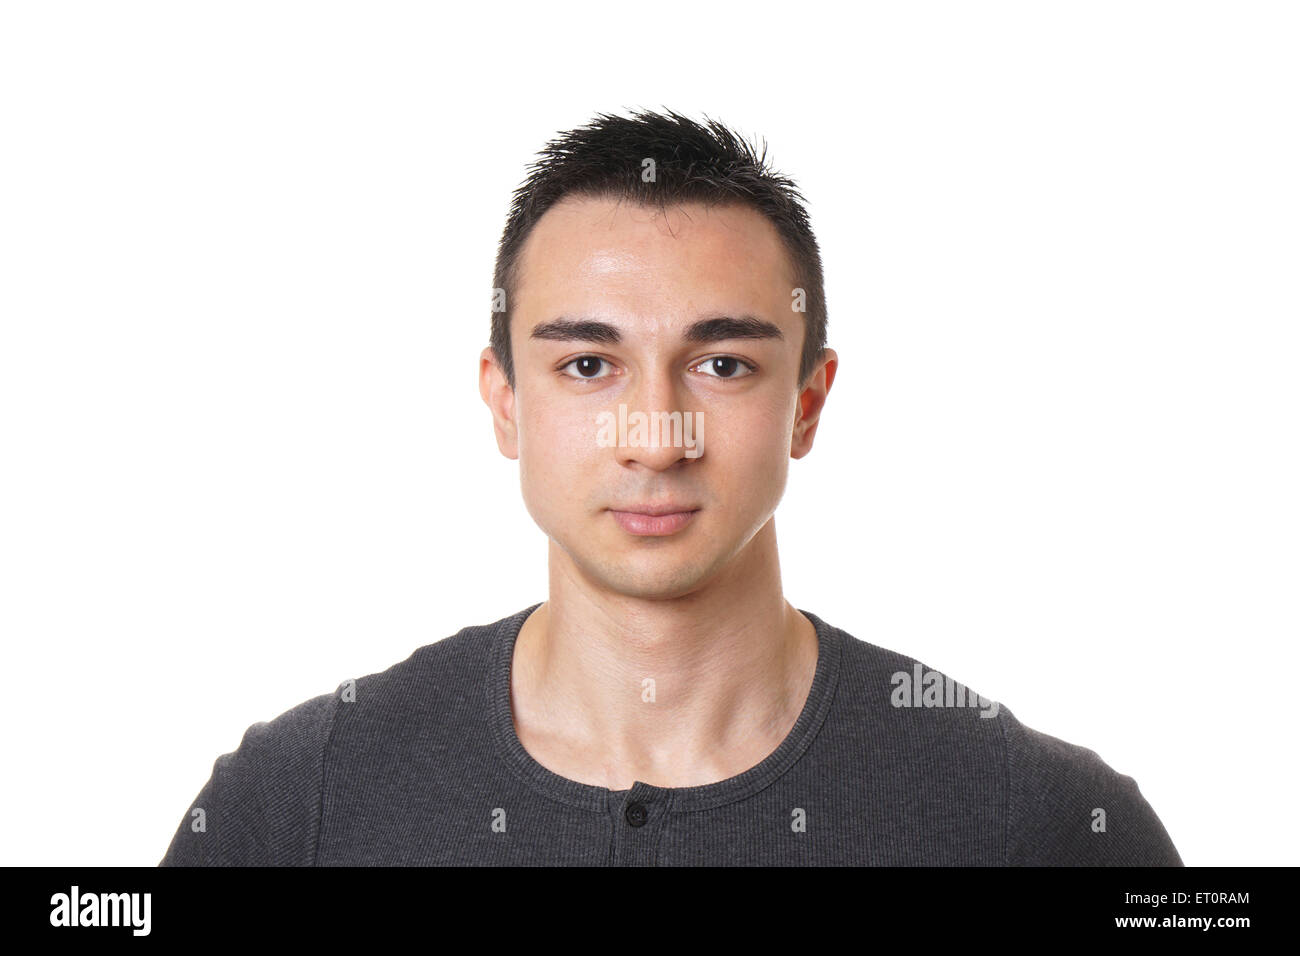 young man with short dark hair Stock Photo